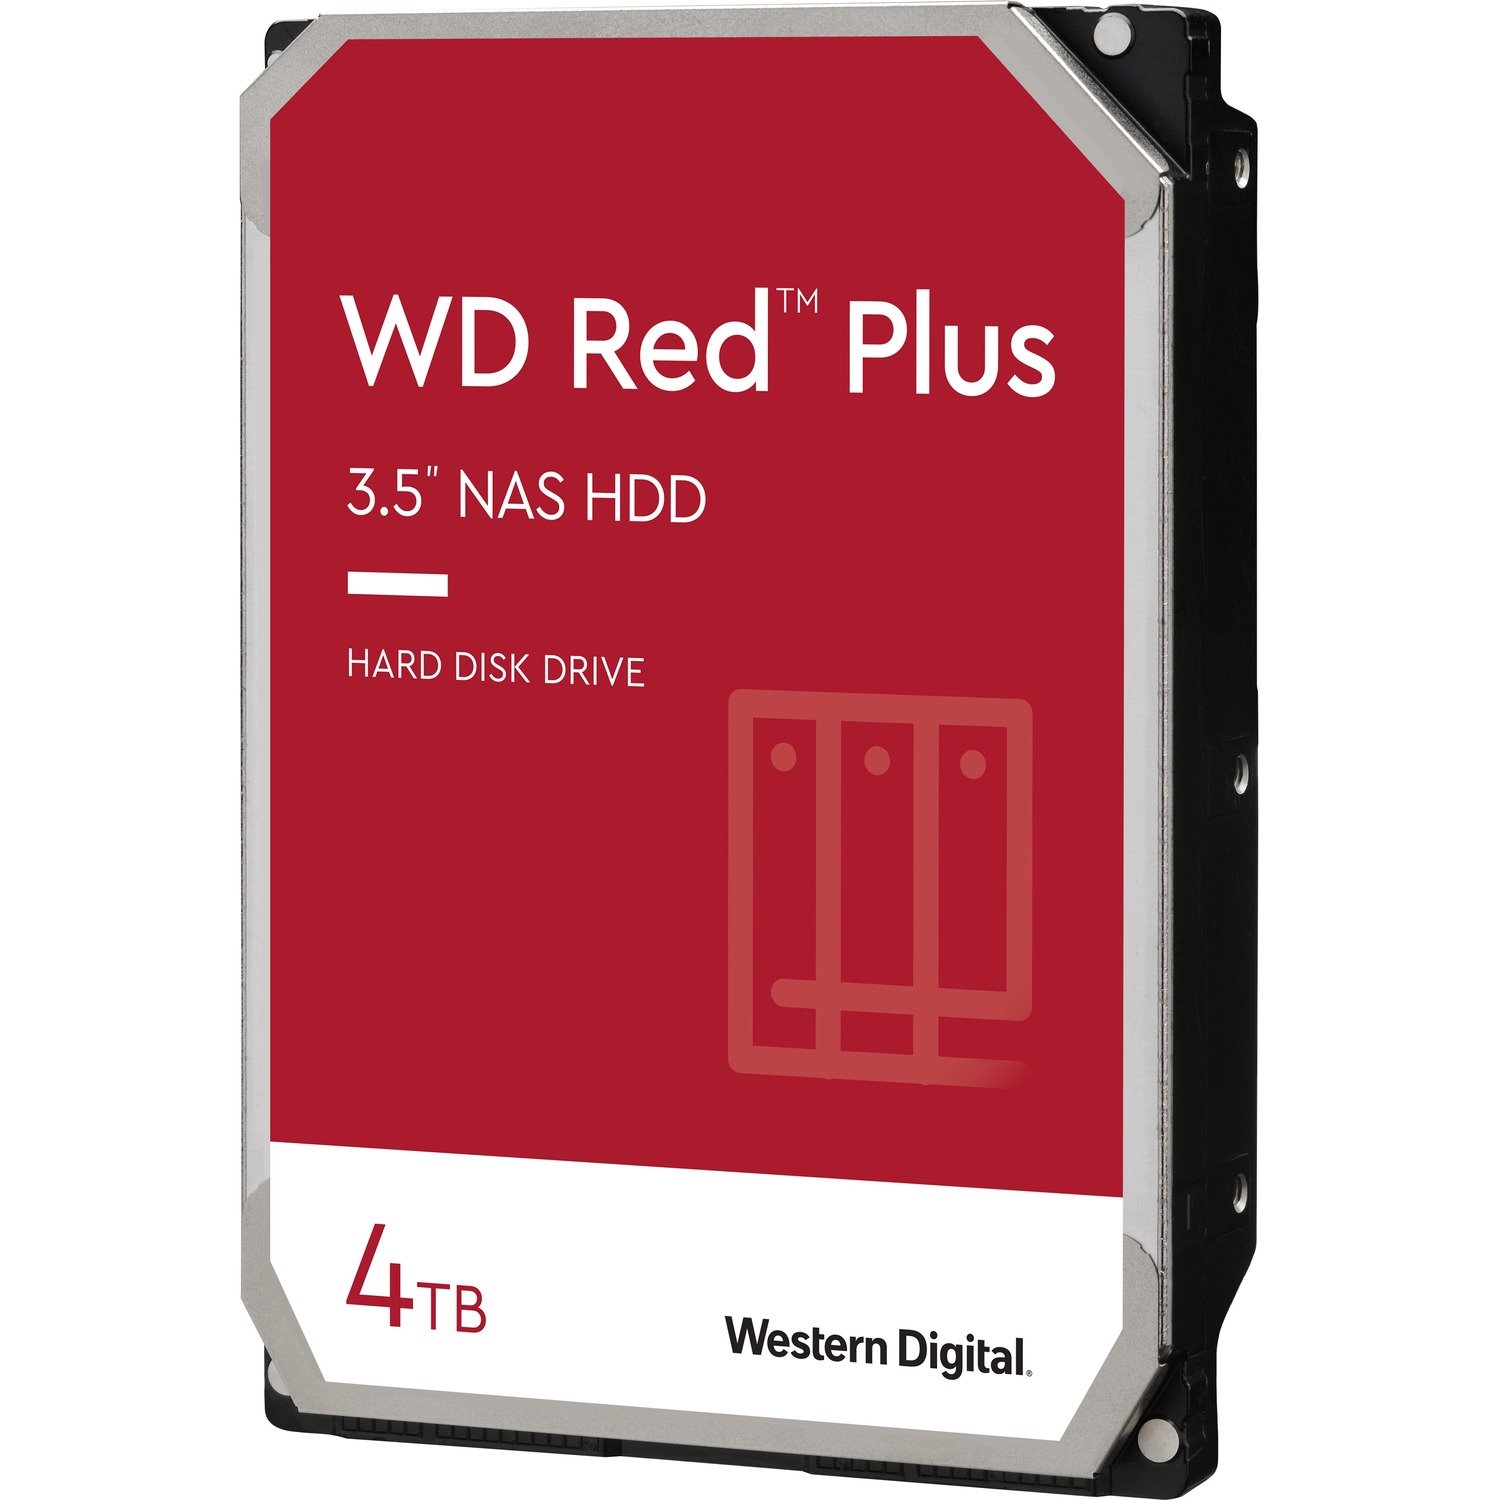 WD Red Plus WD40EFZX 4 TB Hard Drive - 3.5" Internal - SATA (SATA/600) - Conventional Magnetic Recording (CMR) Method